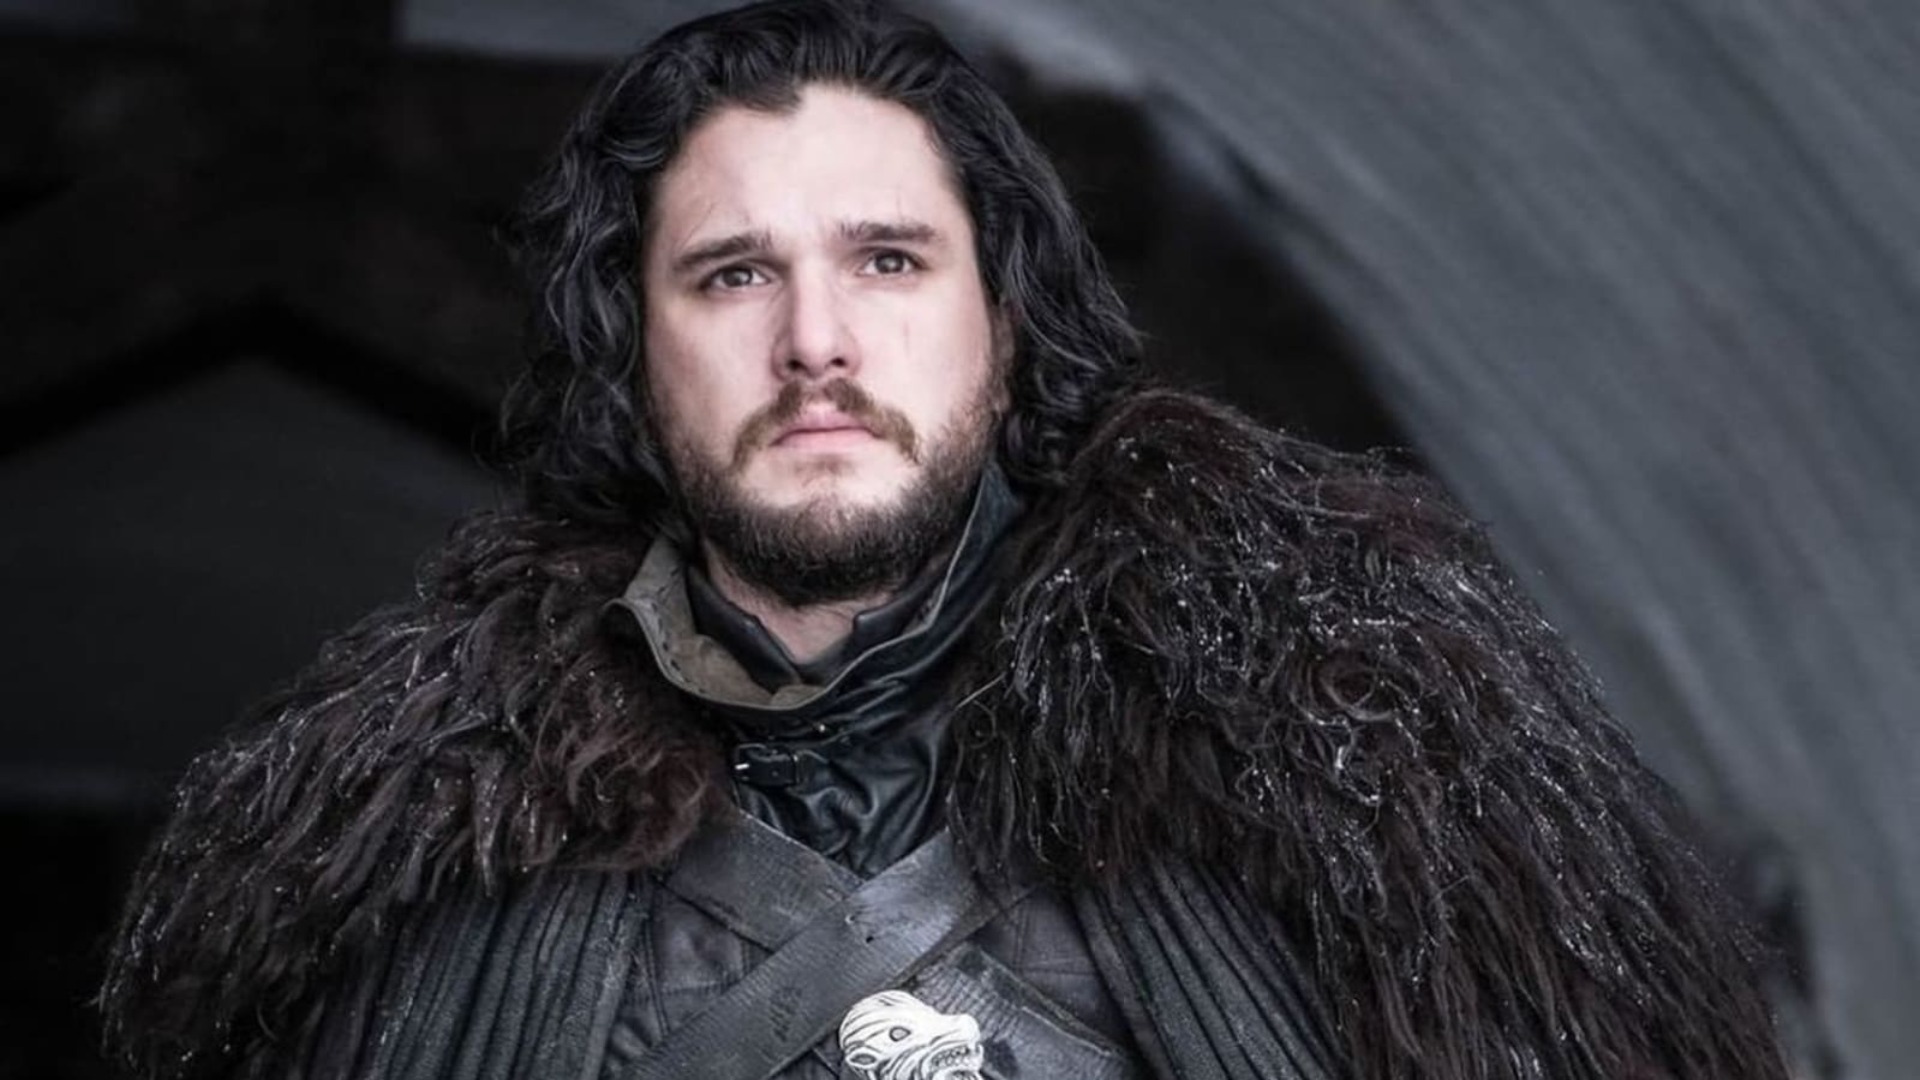 Where Game of Thrones’ sequel series could take Jon Snow